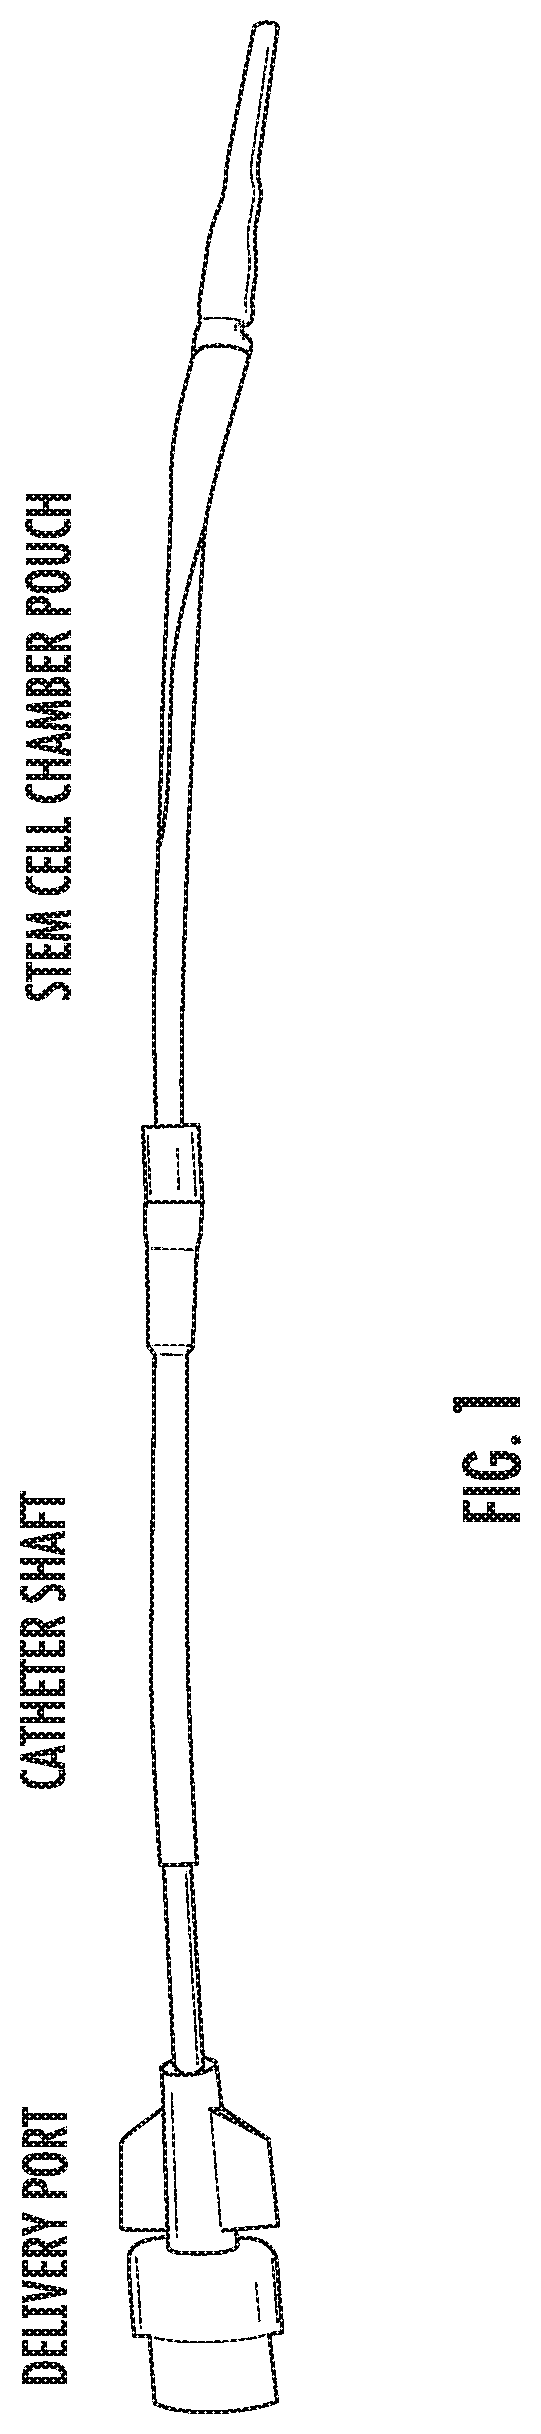 Implantable bioreactor and methods for making and using same